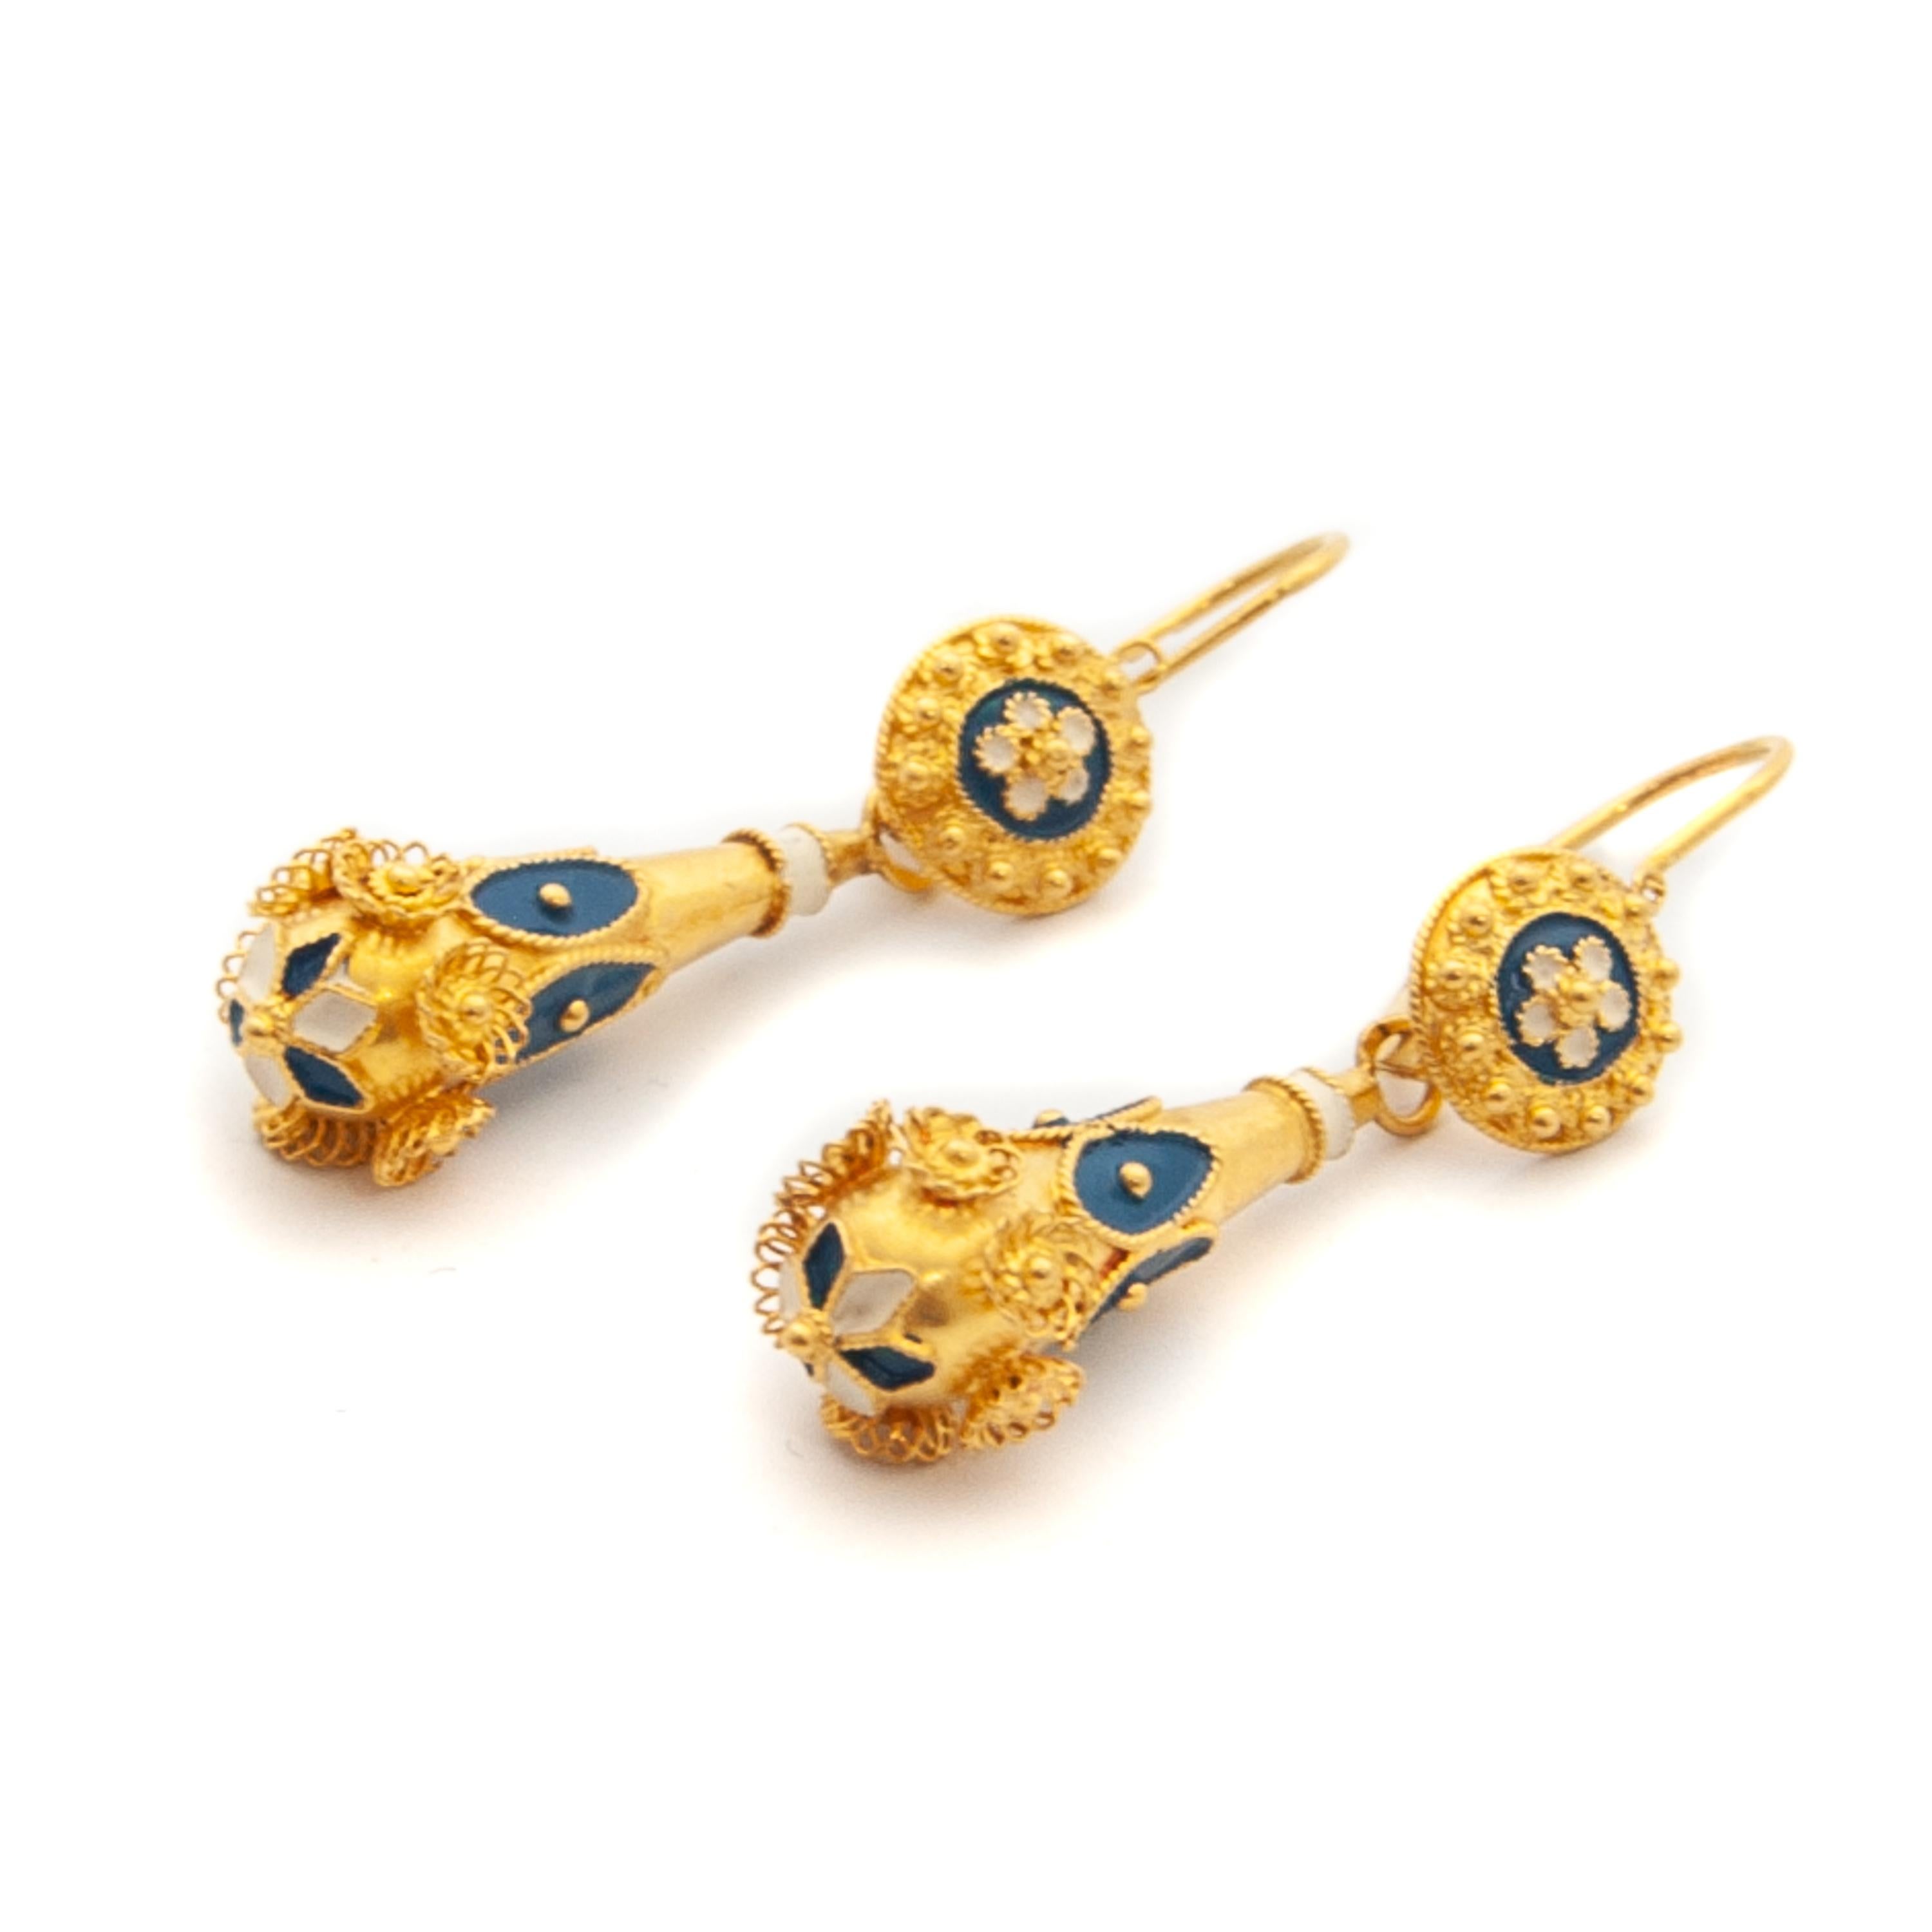 19.2K yellow gold blue and white enameled Portuguese dangle earrings. The earrings are beautifully detailed with enamel and filigree. The upper part of the earrings is represented by a flower enameled rosette surrounded by filigree knots. Hanging